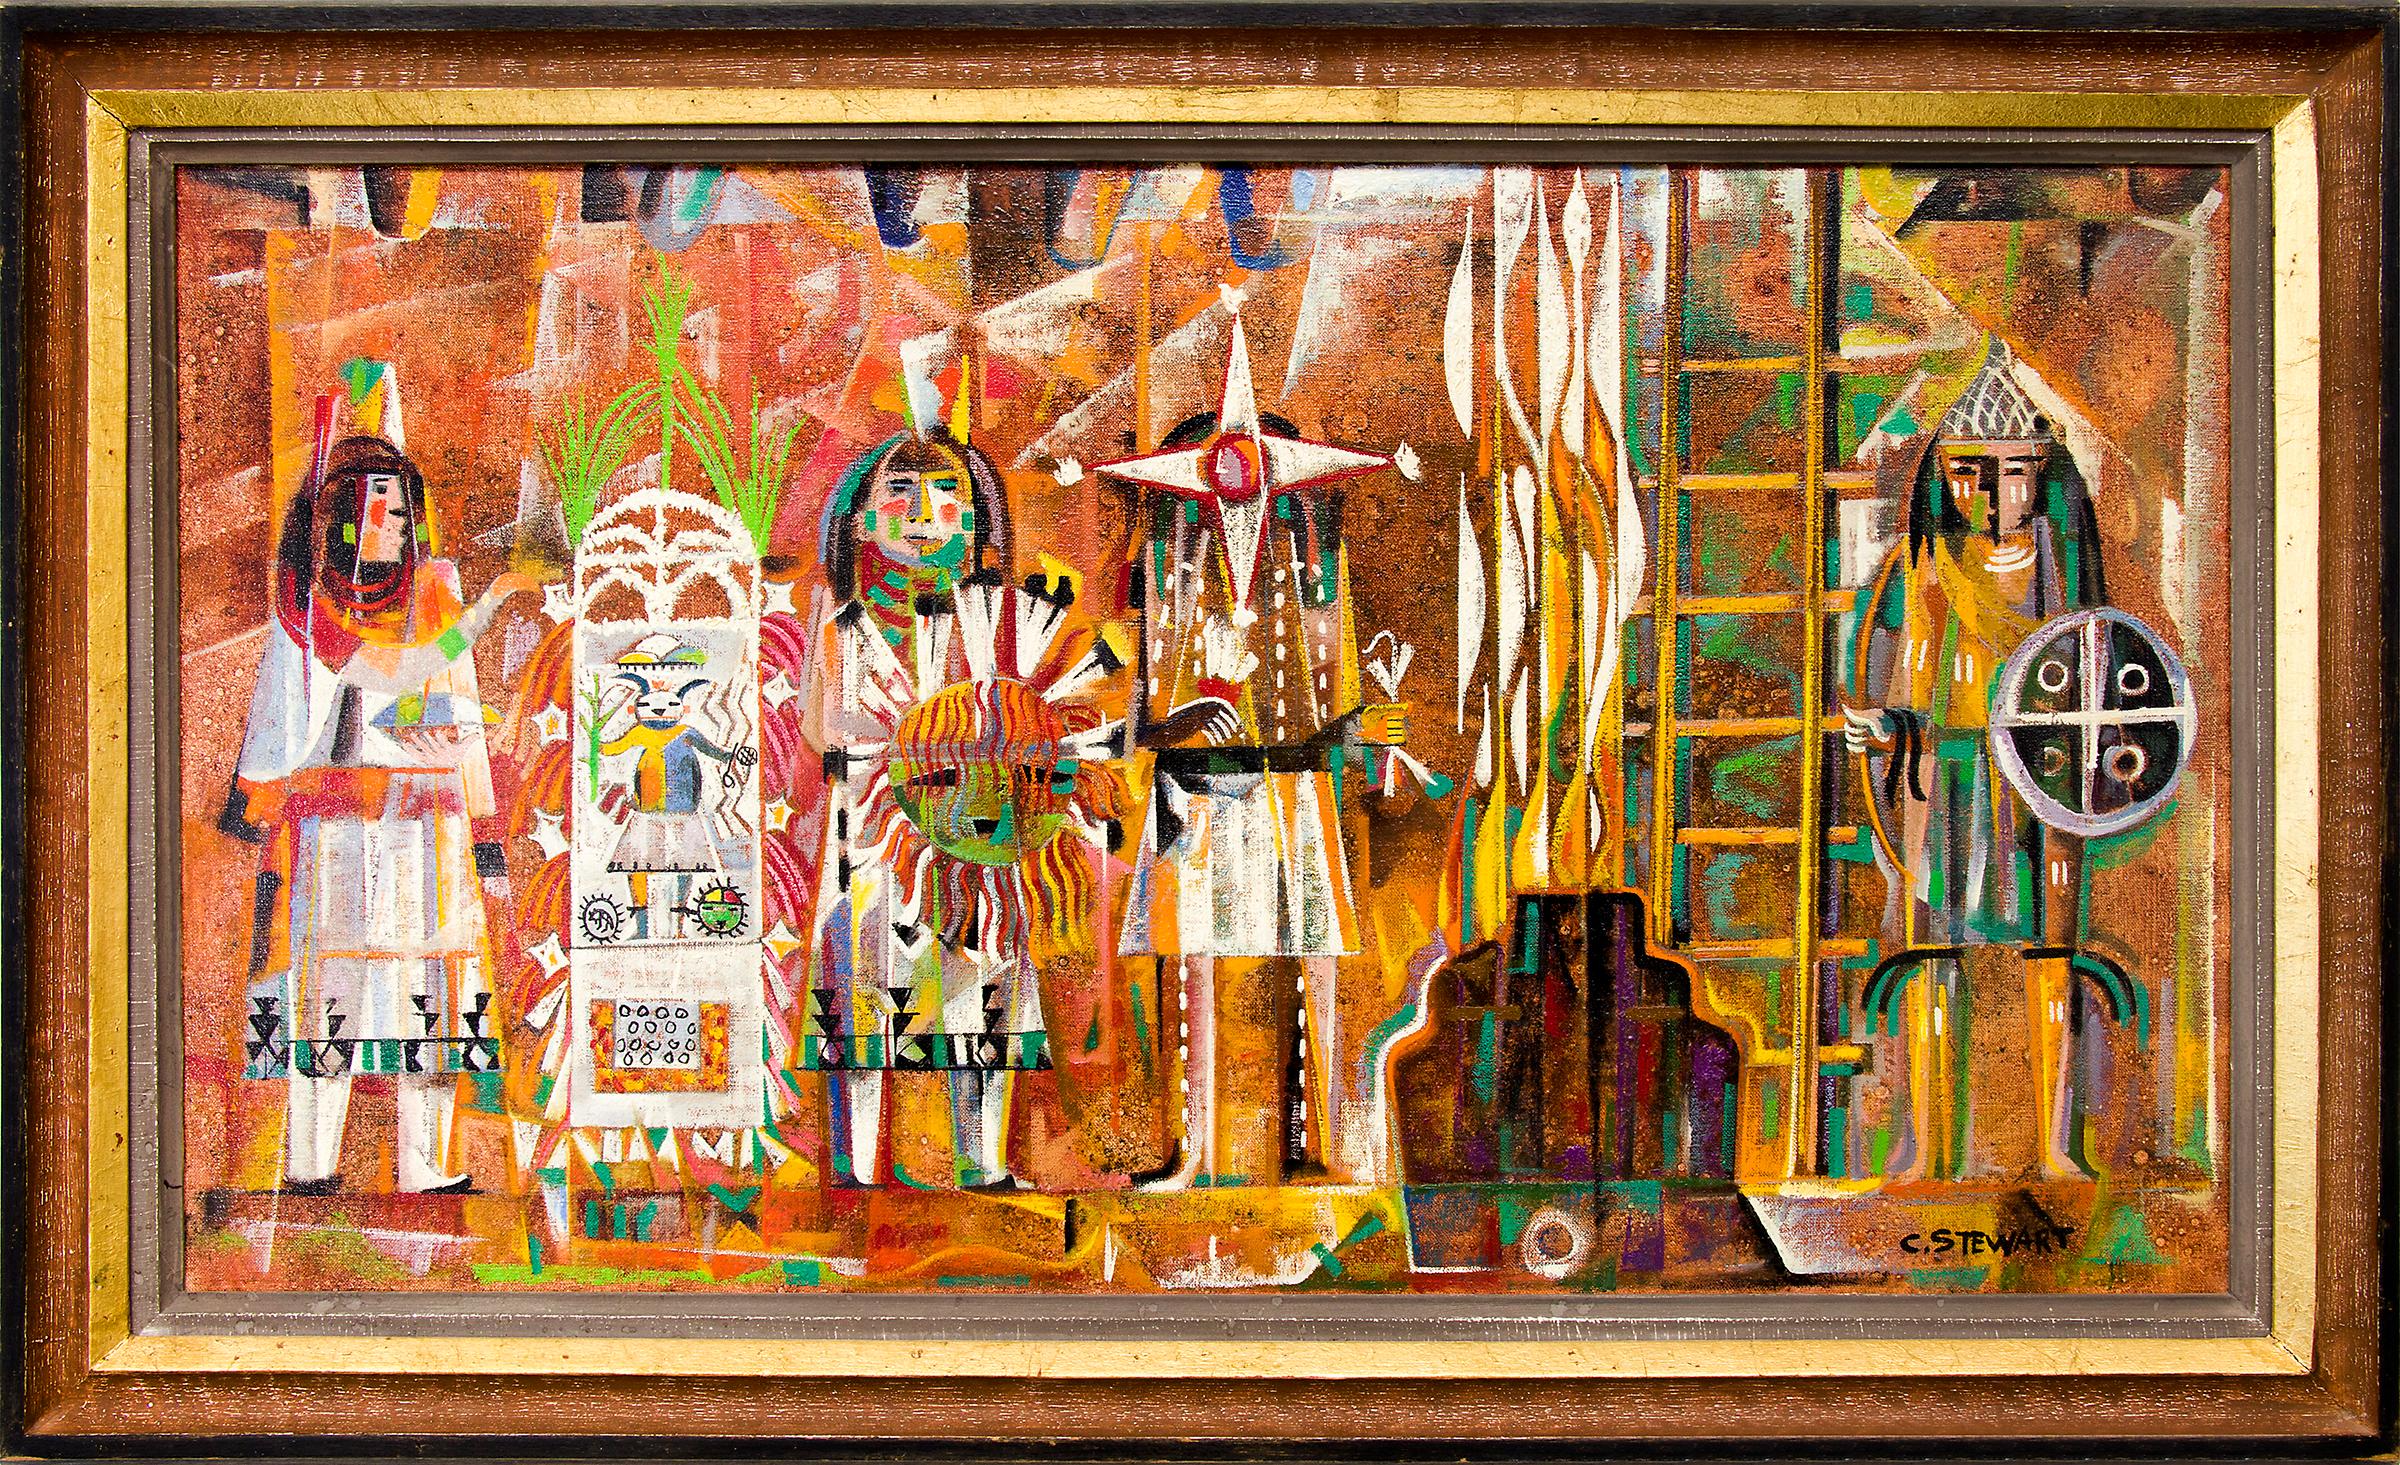 Charles Stewart Abstract Painting - The Warrior and the Star Precedes the Sun (Hopi Ceremony, Oraibe, Arizona)